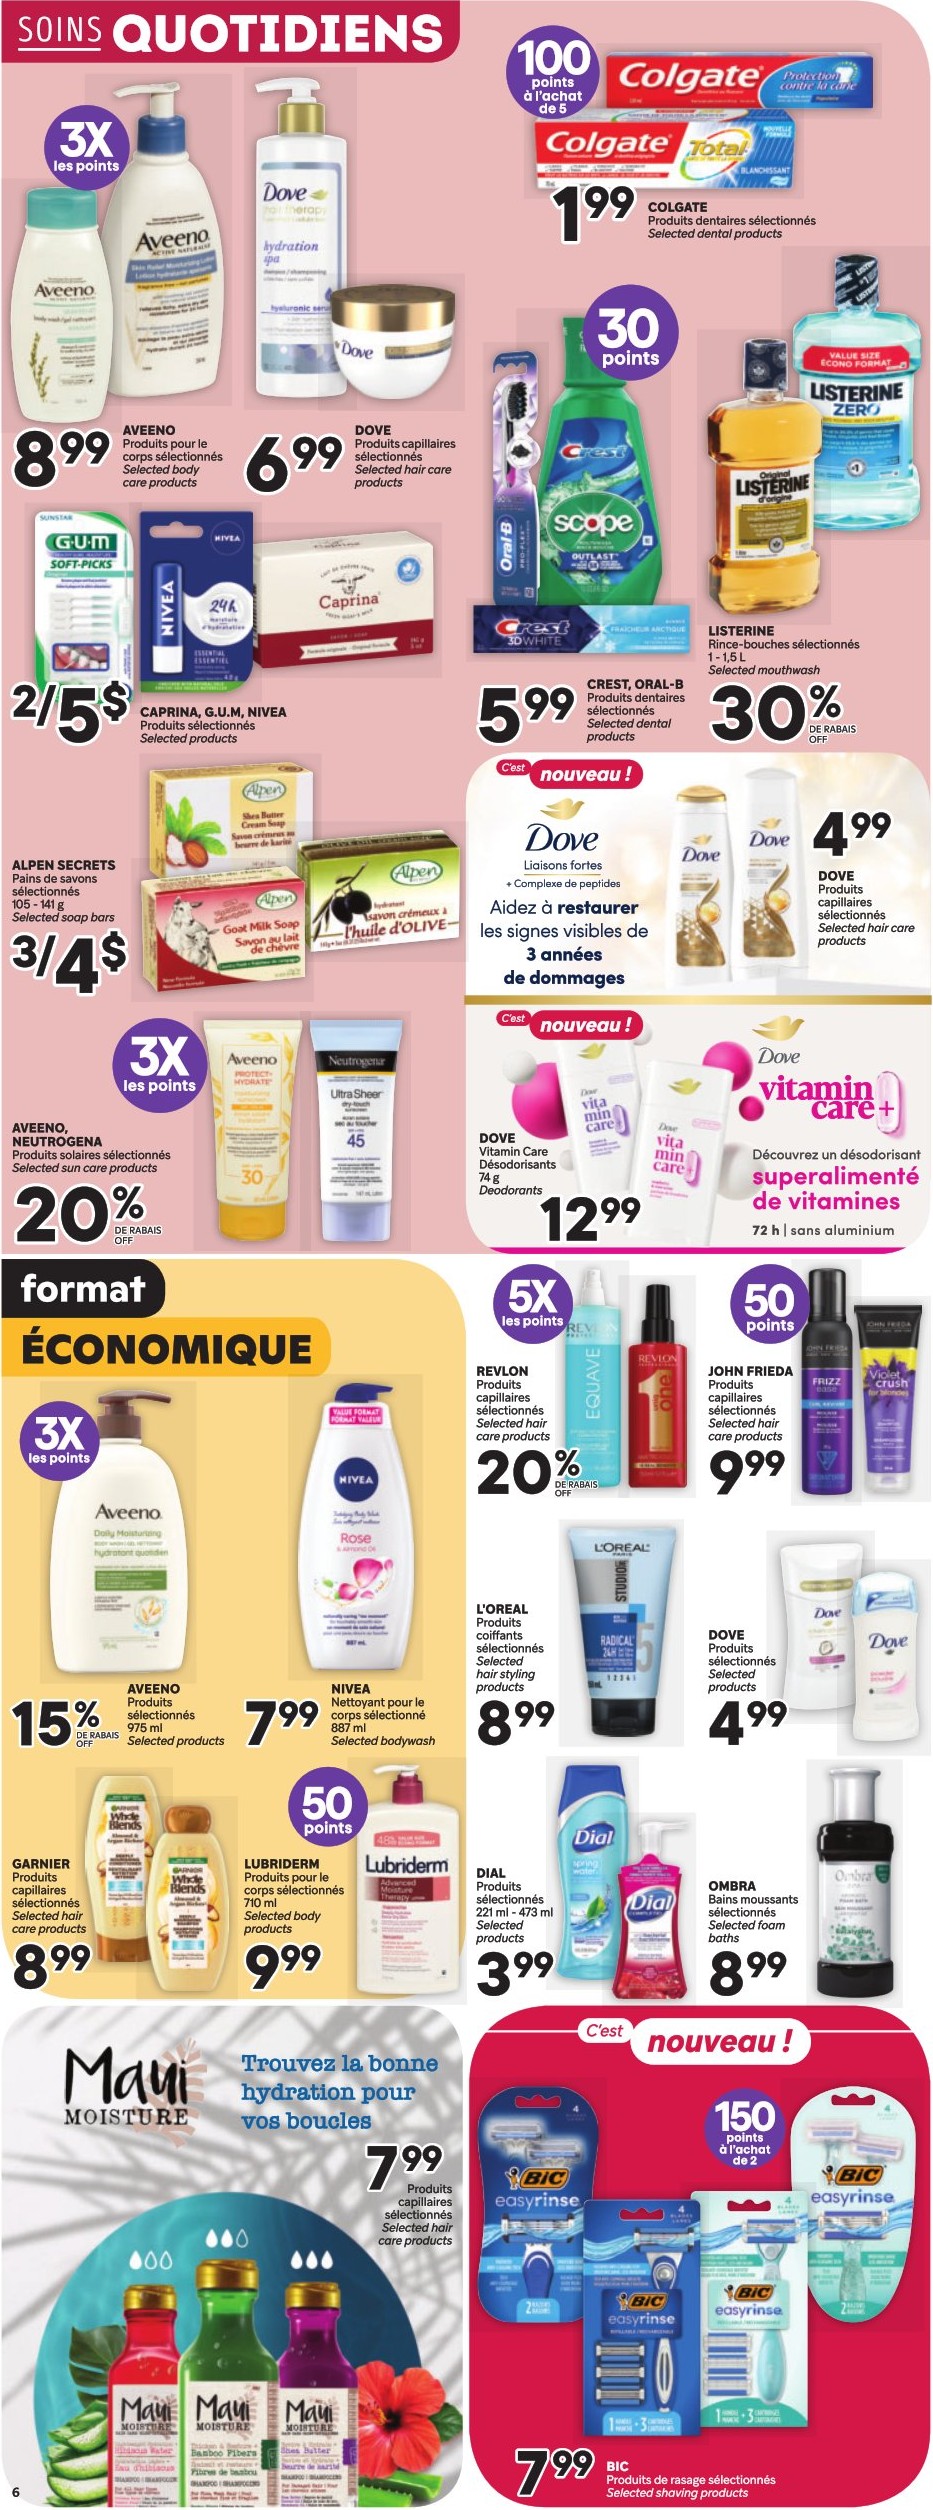 Circulaire Brunet - Pharmacie - Page 5